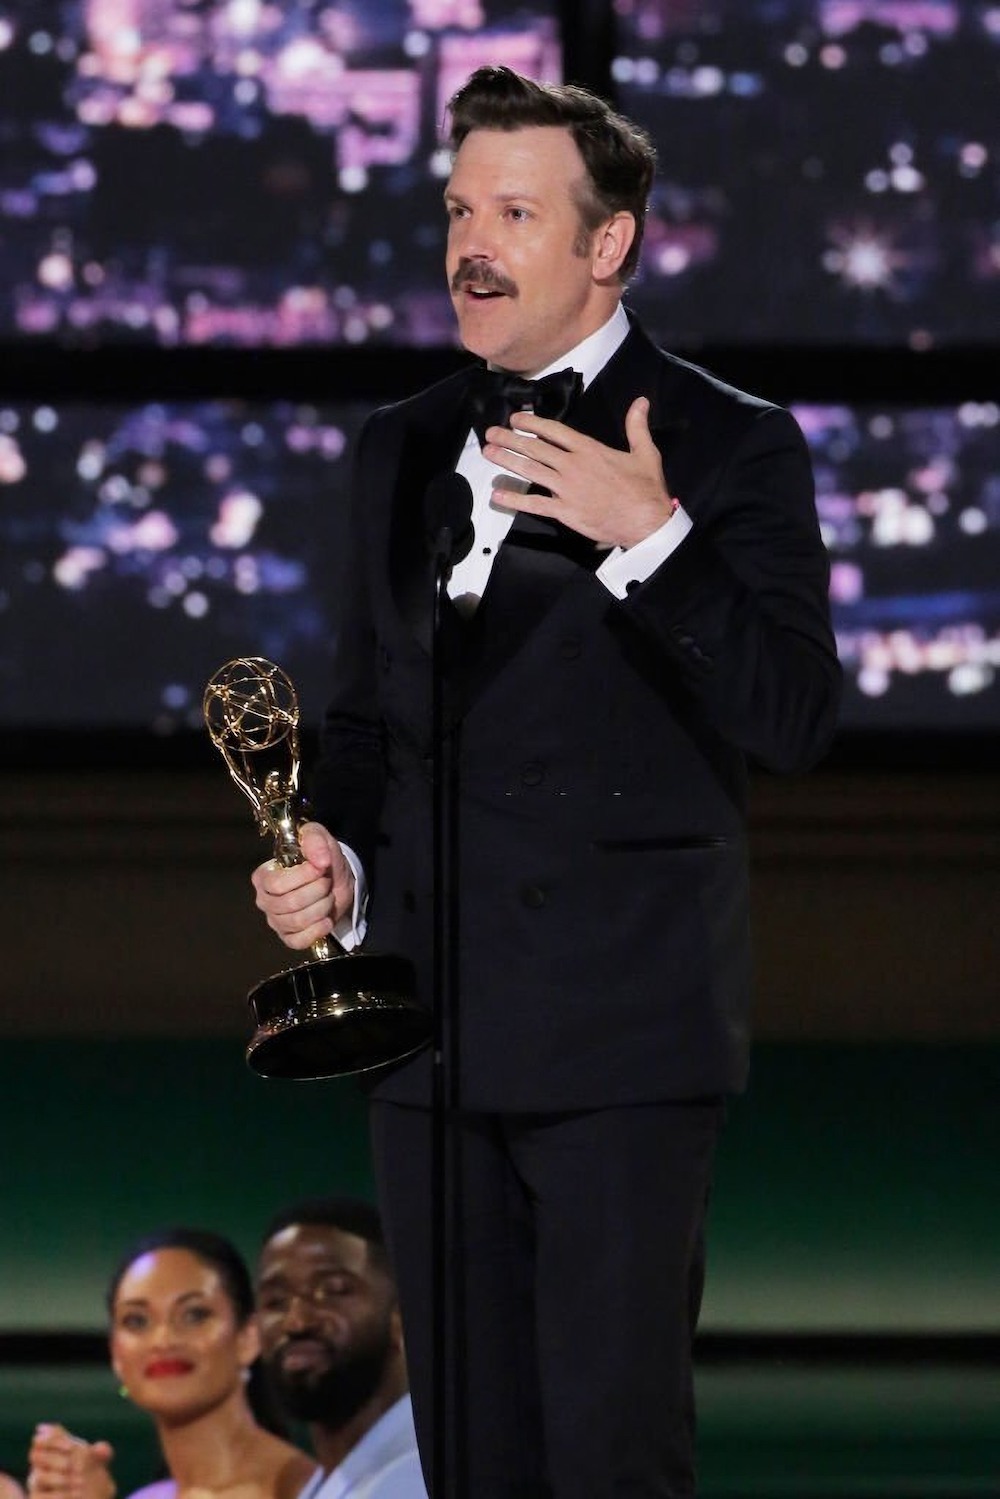 Jason Sudeikis won 'Outstanding Lead Actor in a Comedy Series' for Ted Lasso onstage at the 2022 Emmy Awards.